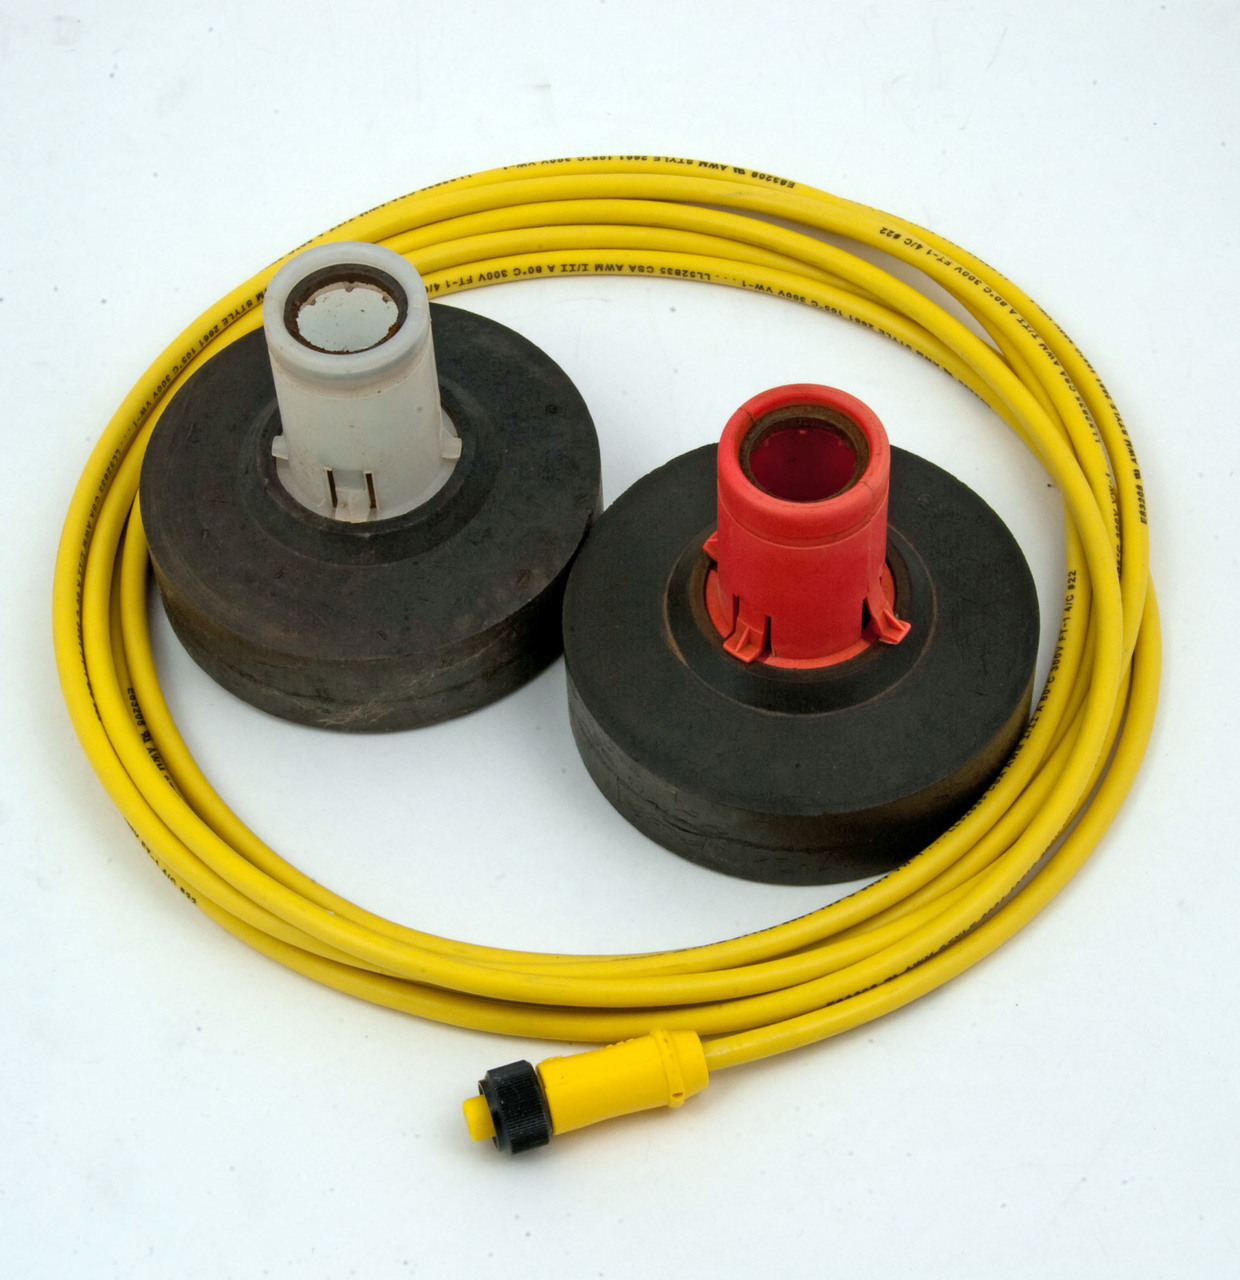 USED GAS FLOAT KIT, Fits Incon Image